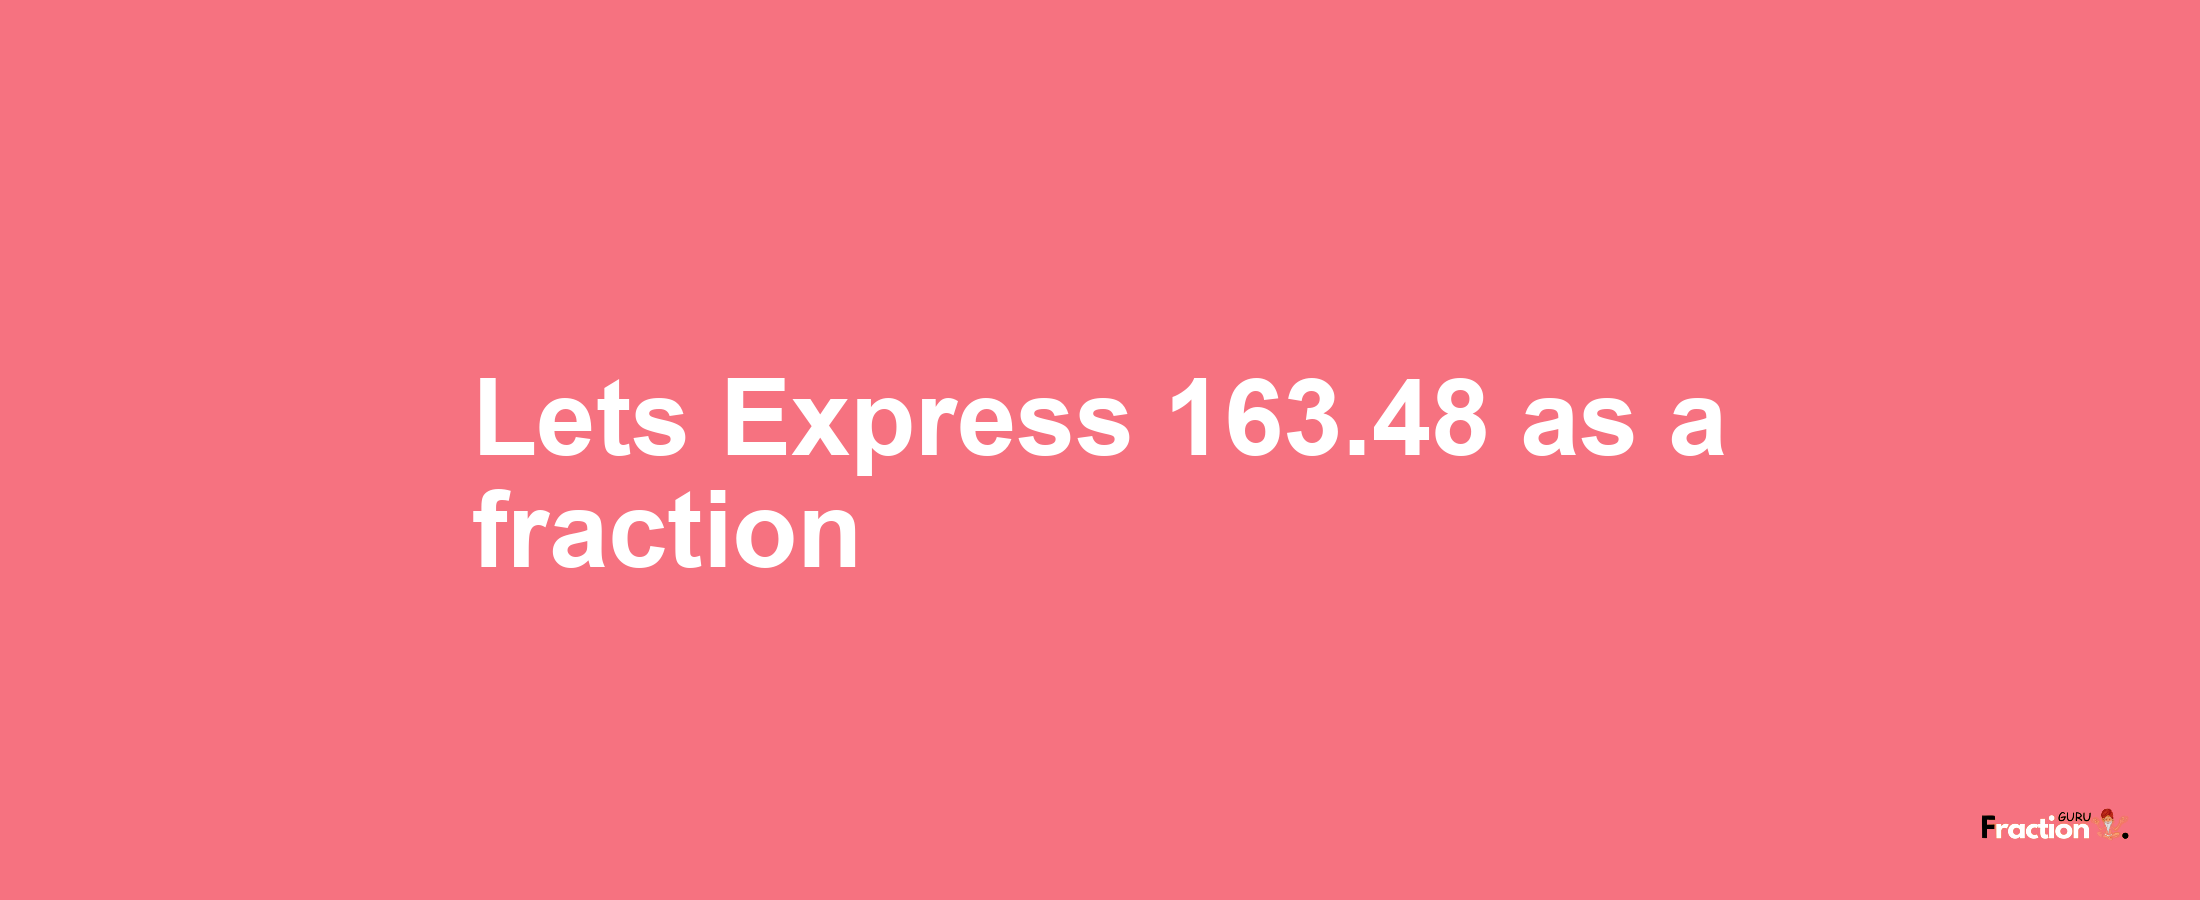 Lets Express 163.48 as afraction